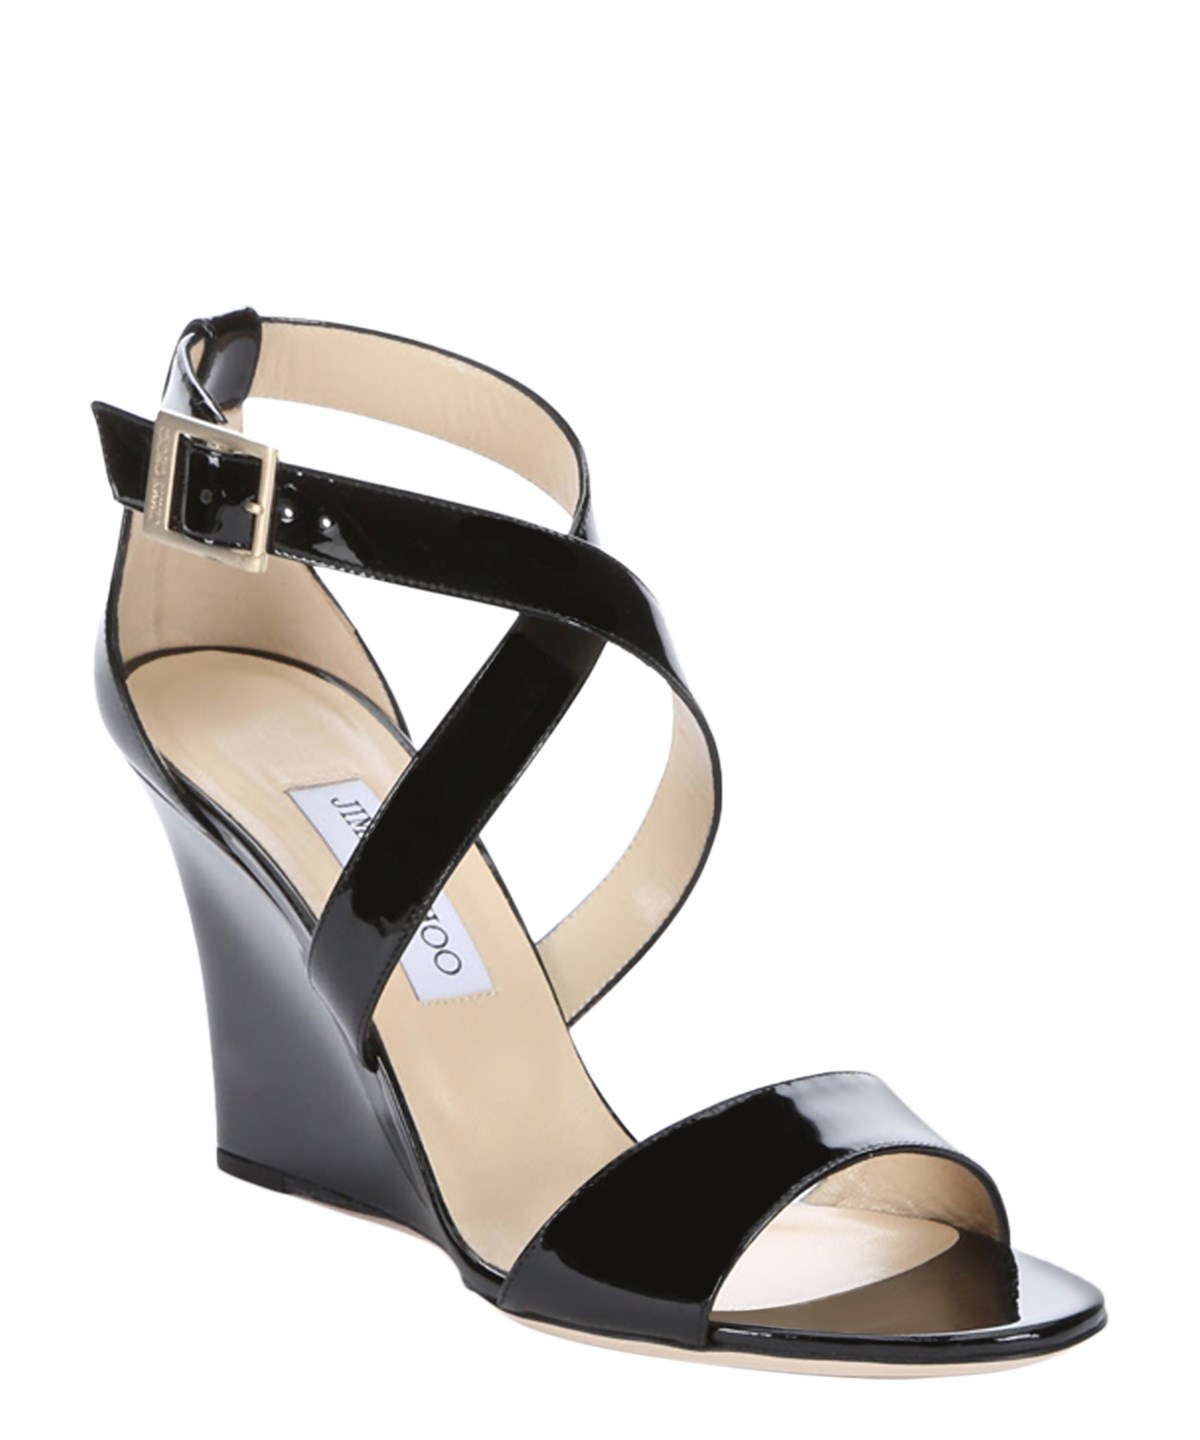 Jimmy Choo Black Patent Leather 'fearne' Wedge Sandals' | ModeSens